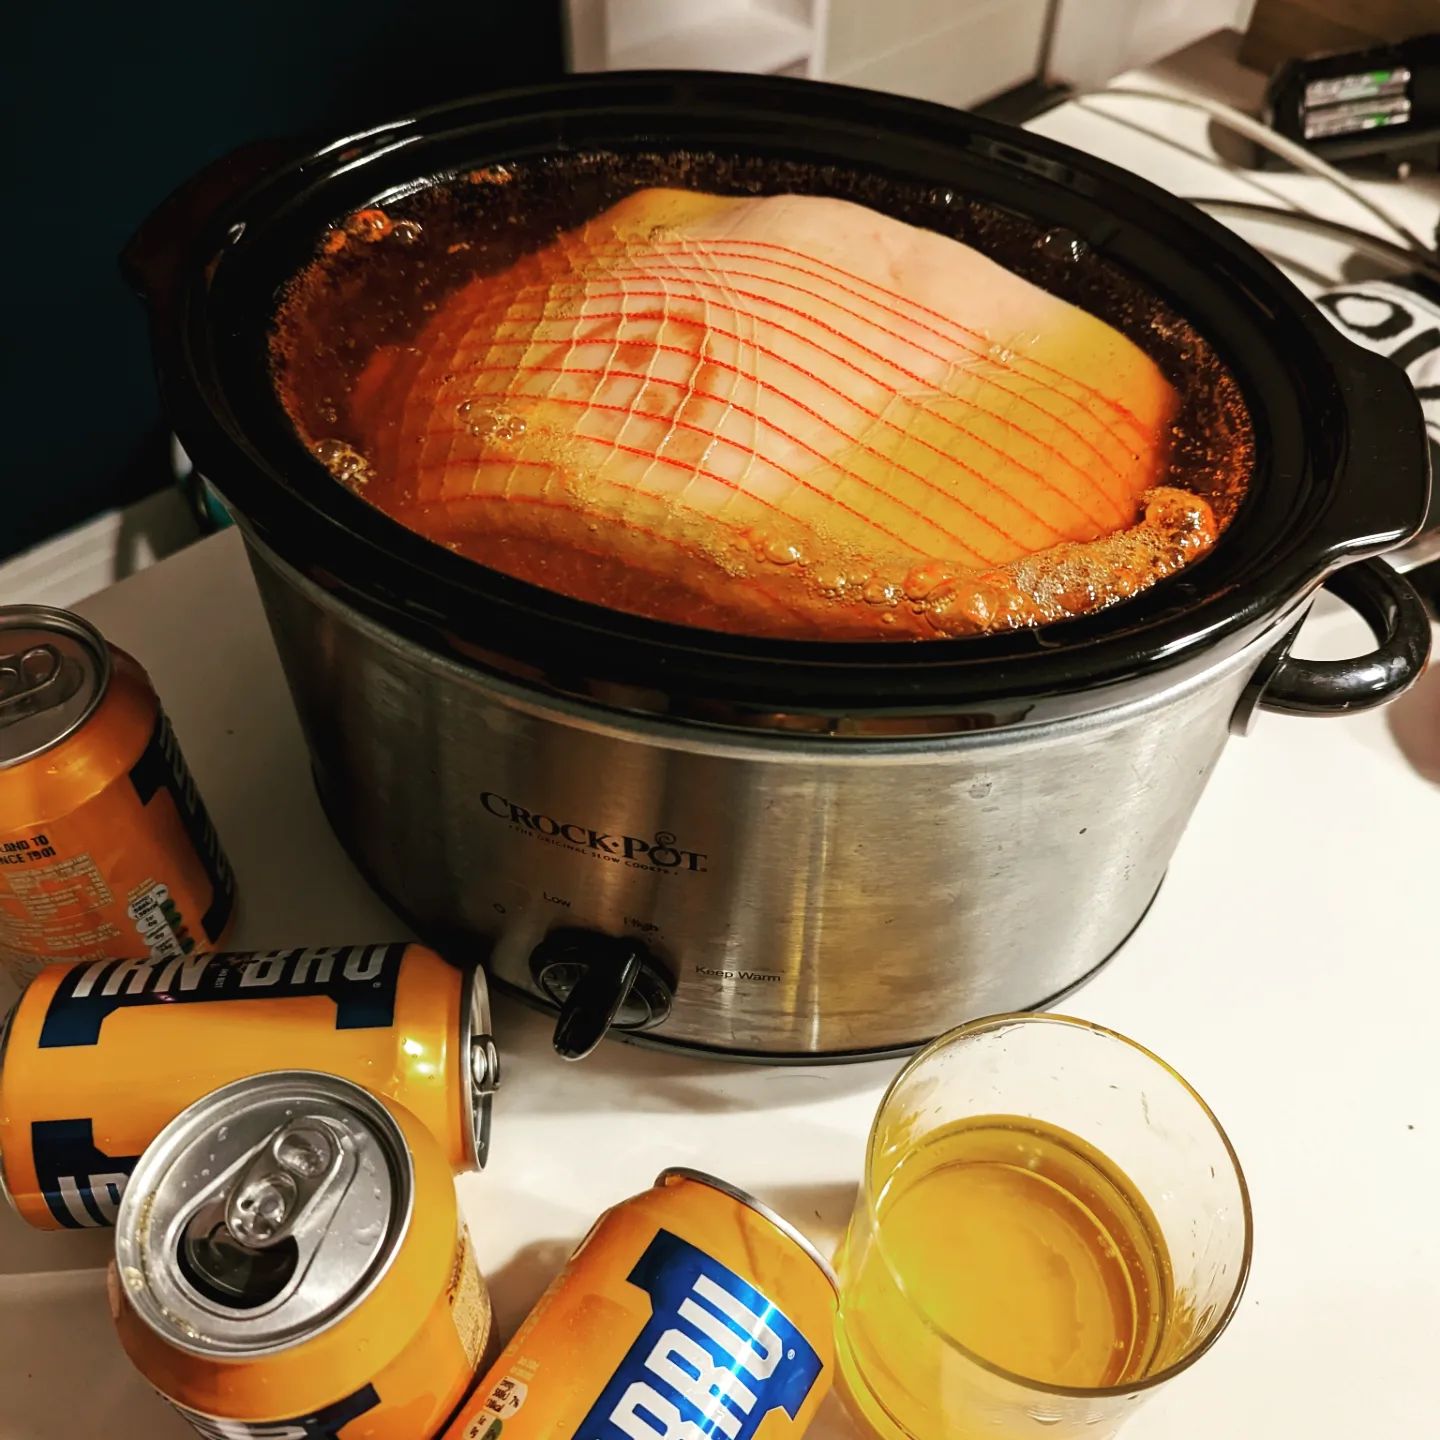 Today's adequate food: slow cooked Irn Bru glazed xmas ham. Made with pre-recipe-change (c 2018?) "shed rested" Irn Bru.